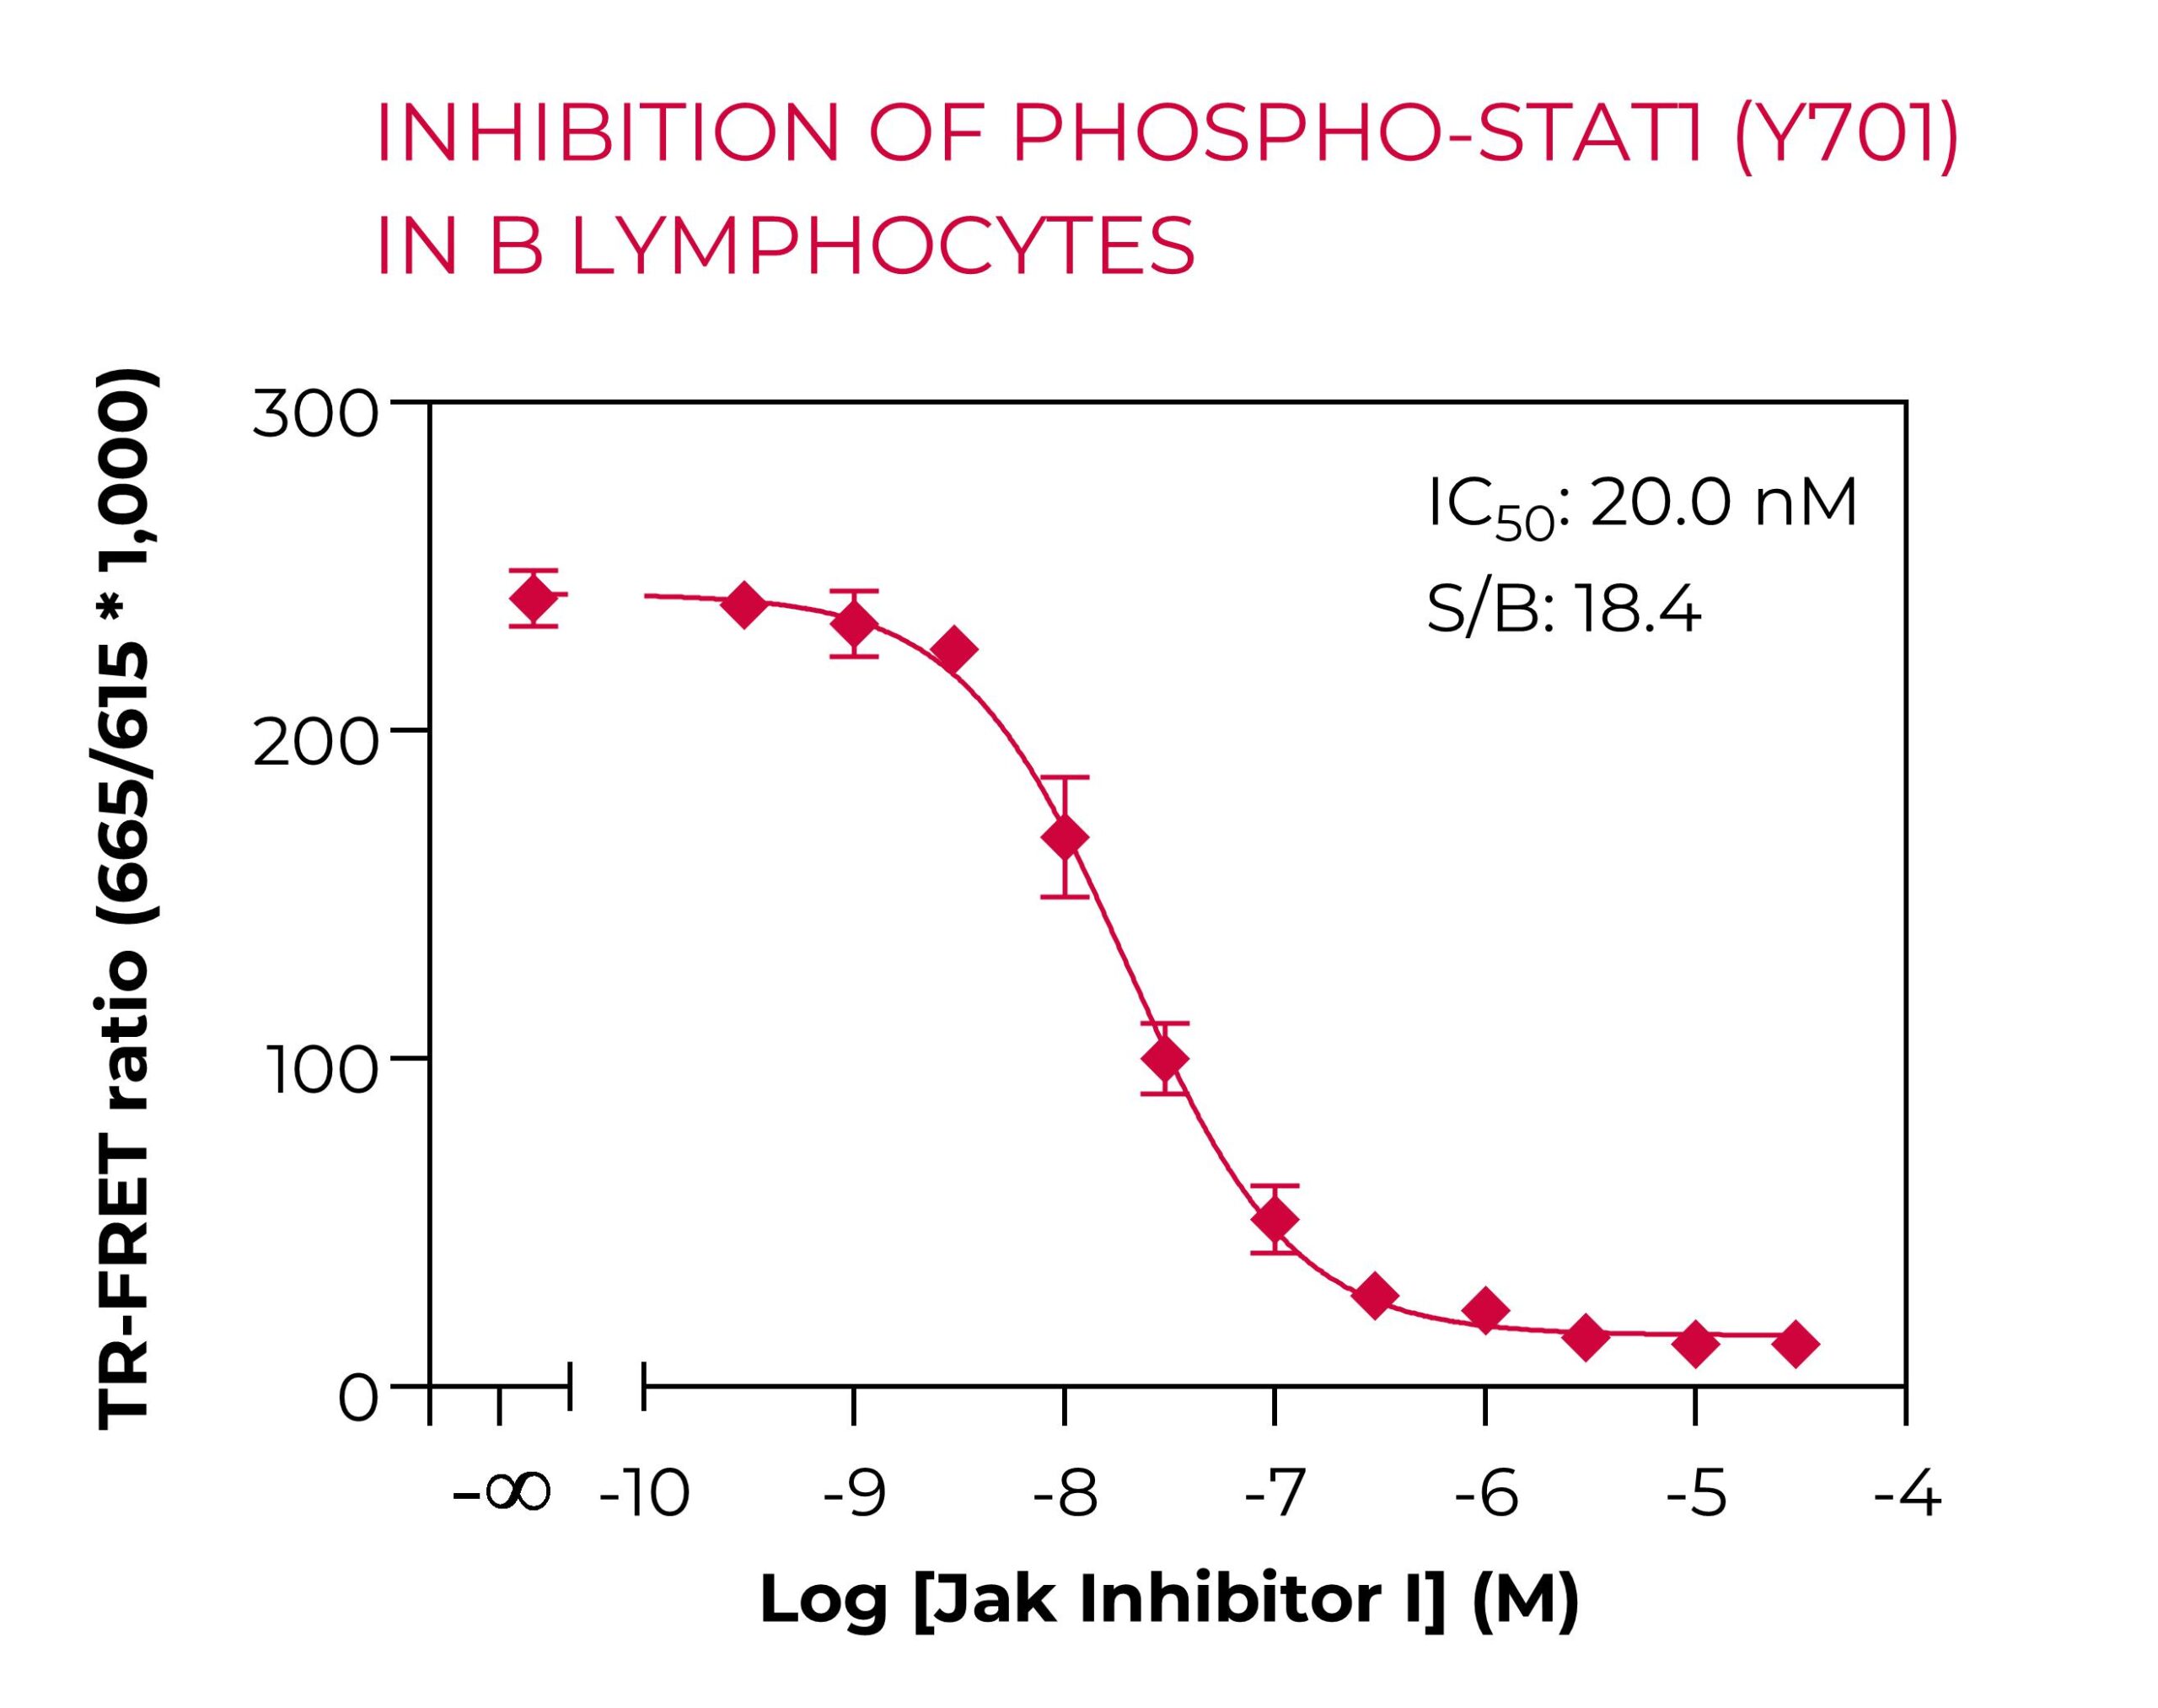 Inhibition of Phospho-STAT1 in B cells